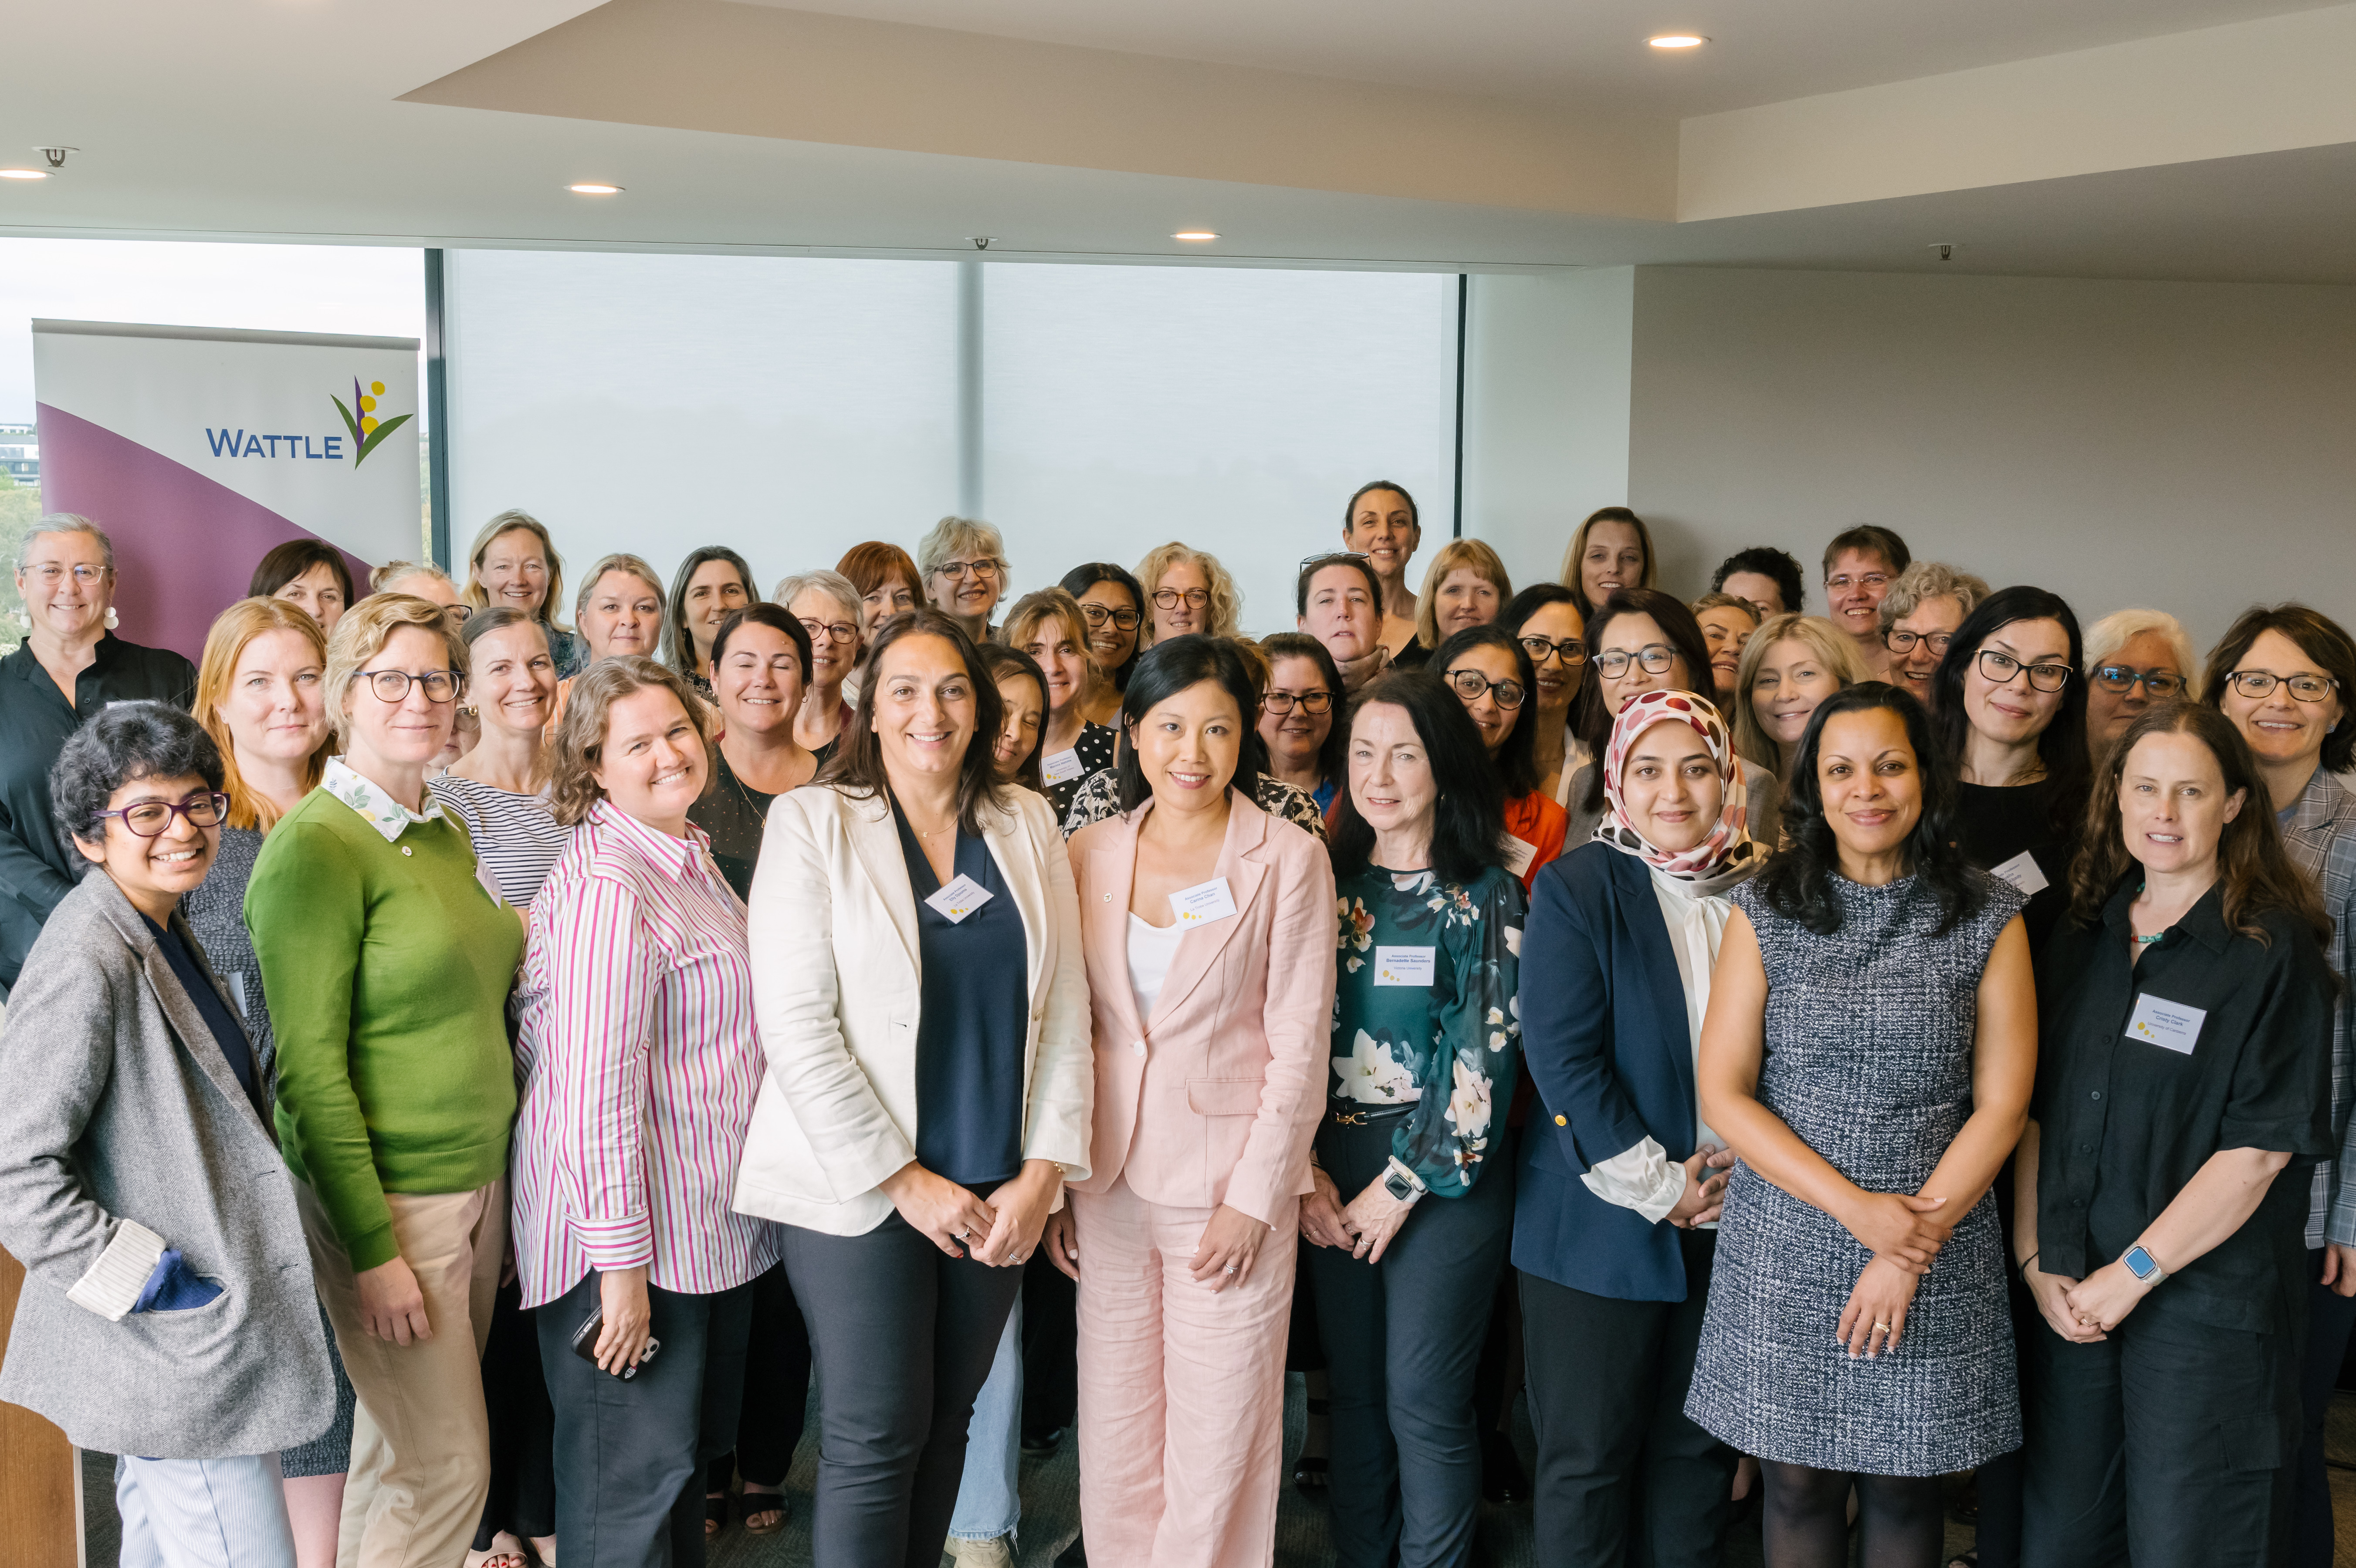 Group photo of women smiling inside a room at leadership event